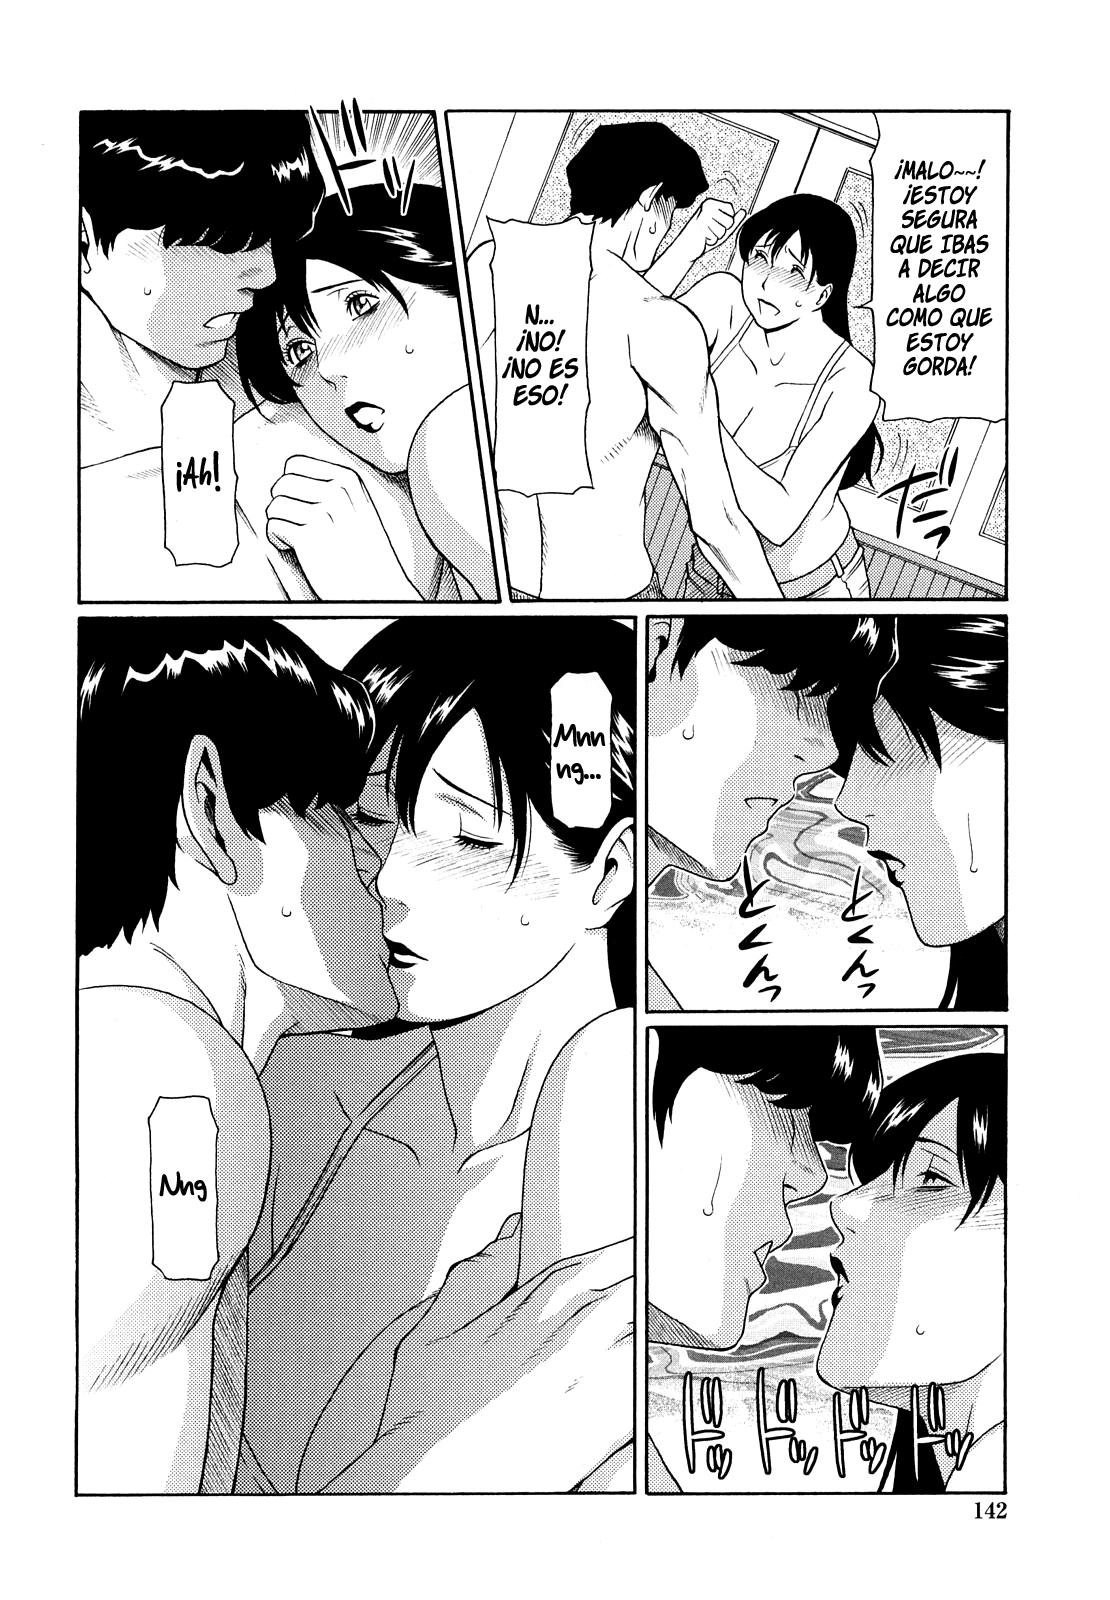 Immorality Love-Hole Completo (Sin Censura) Chapter-9 - 5